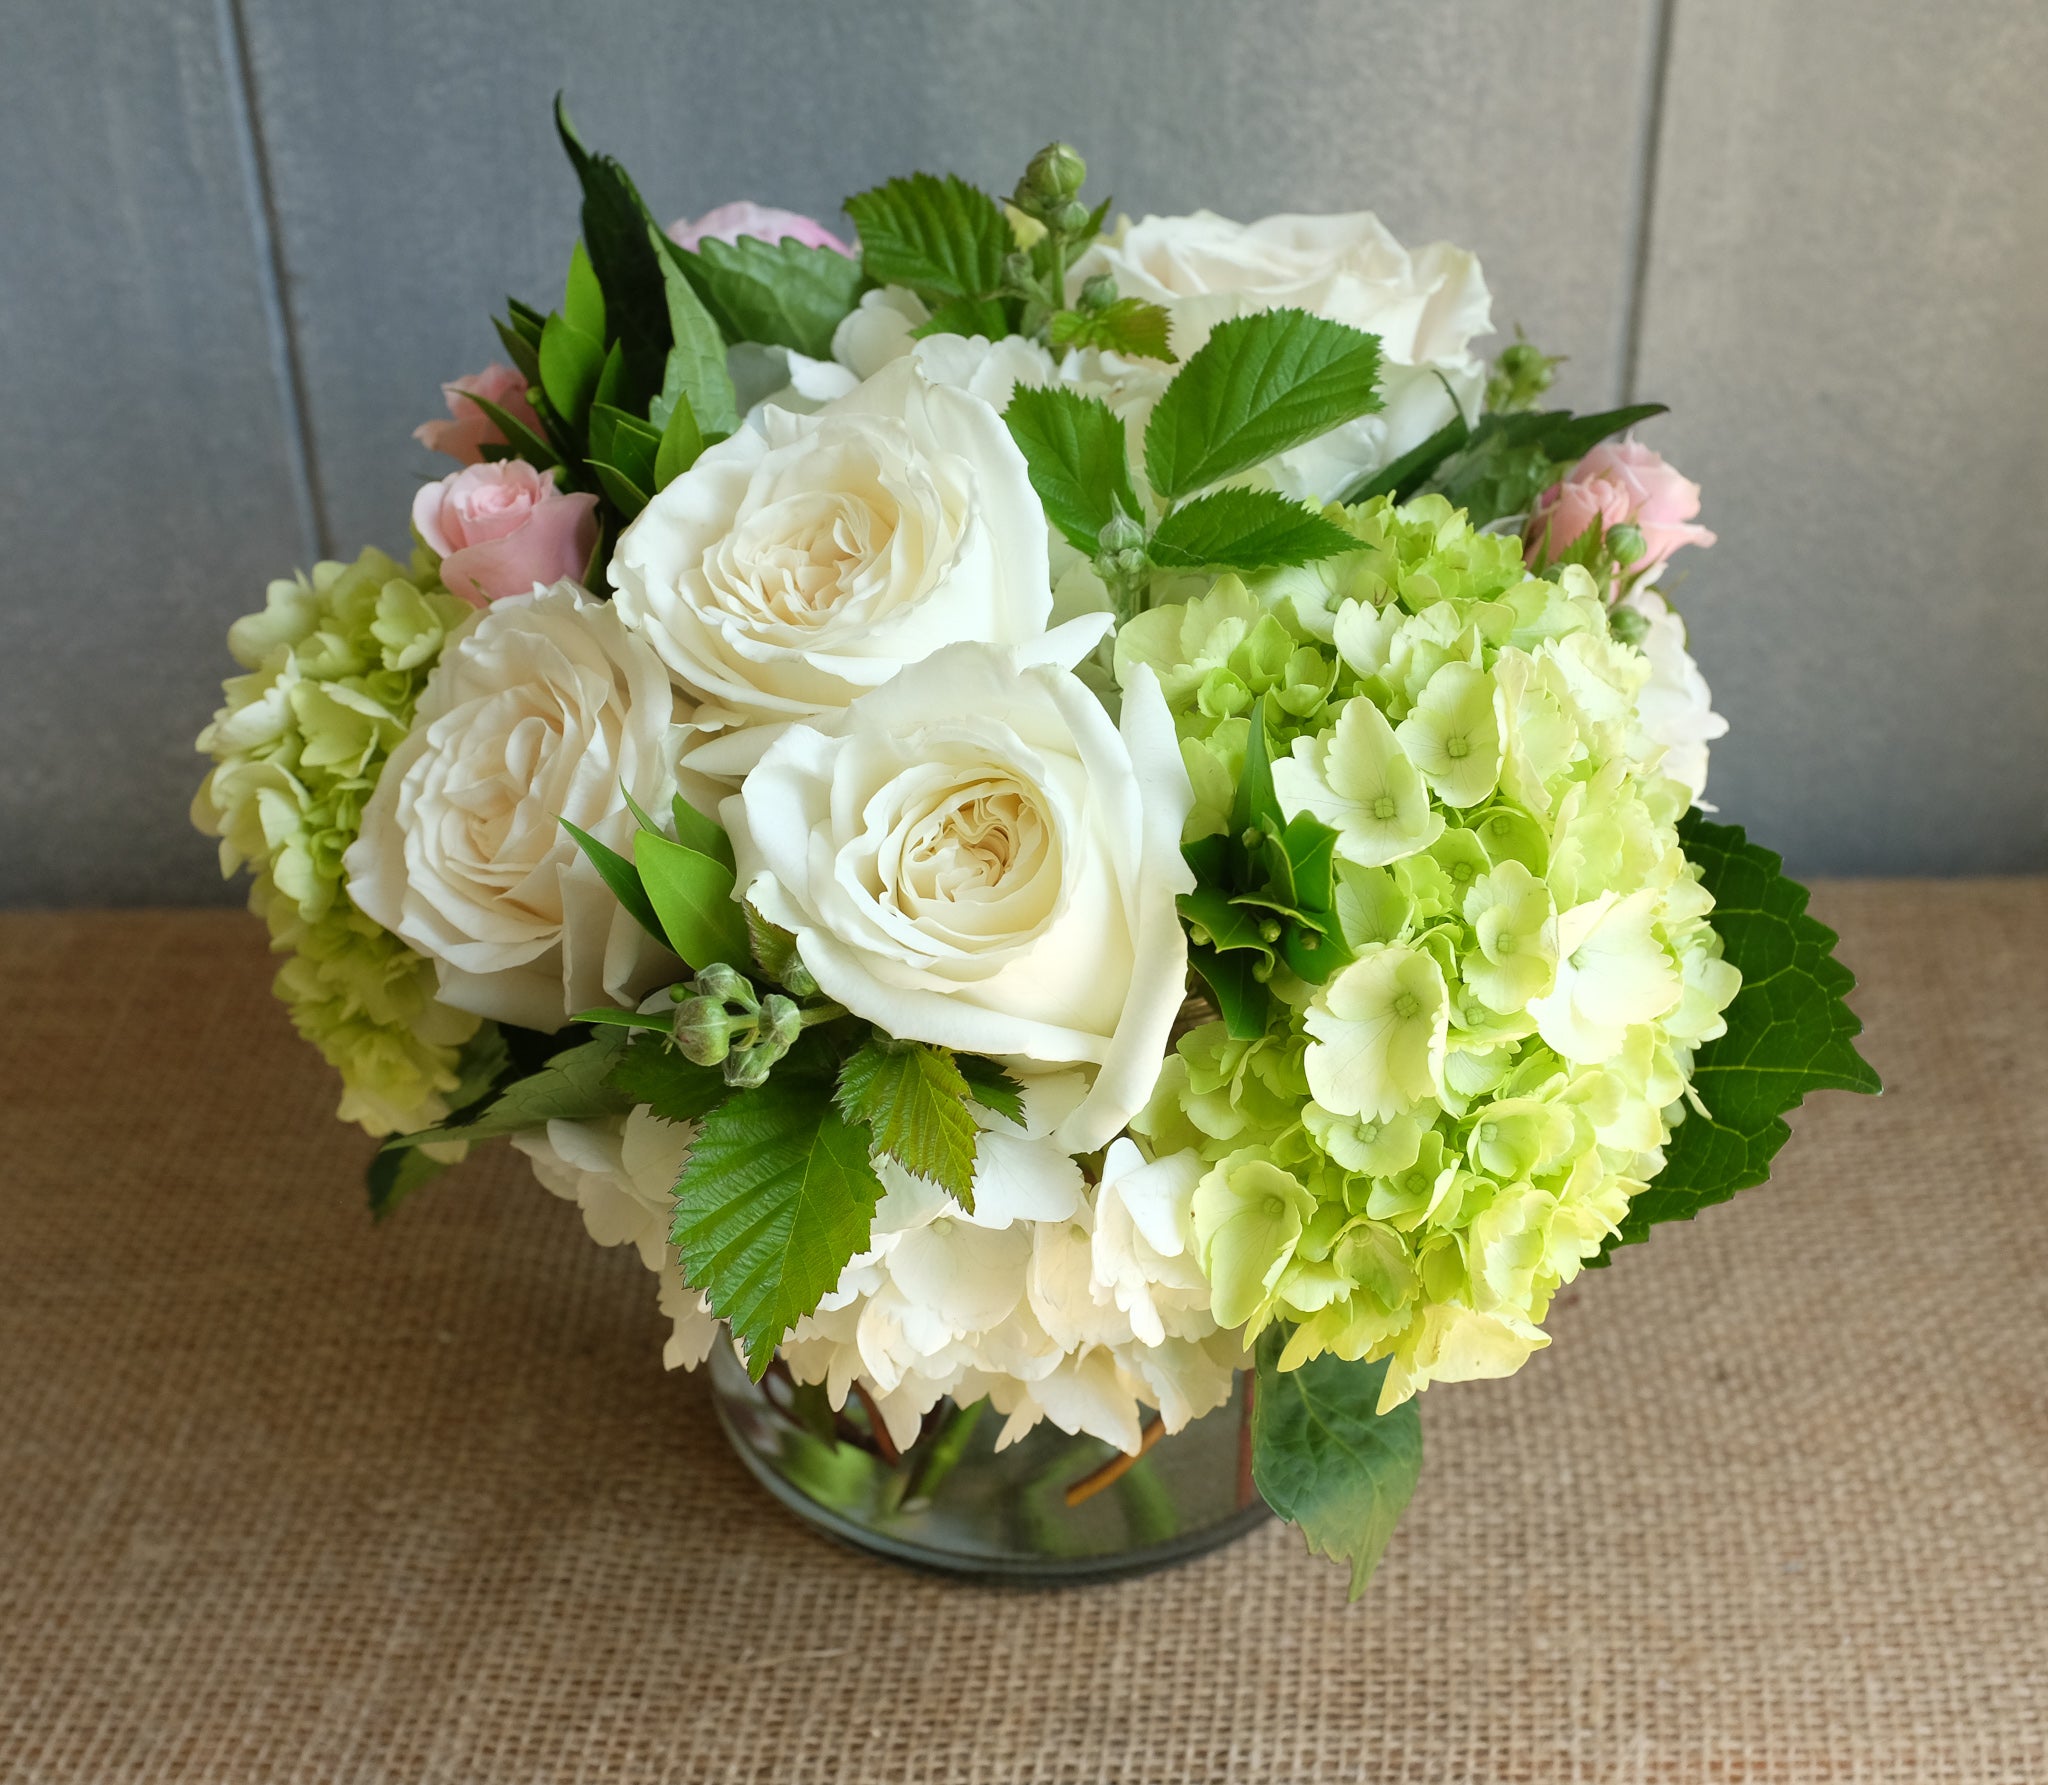 White and green bouquet of roses and hydrangea with a touch of pink.